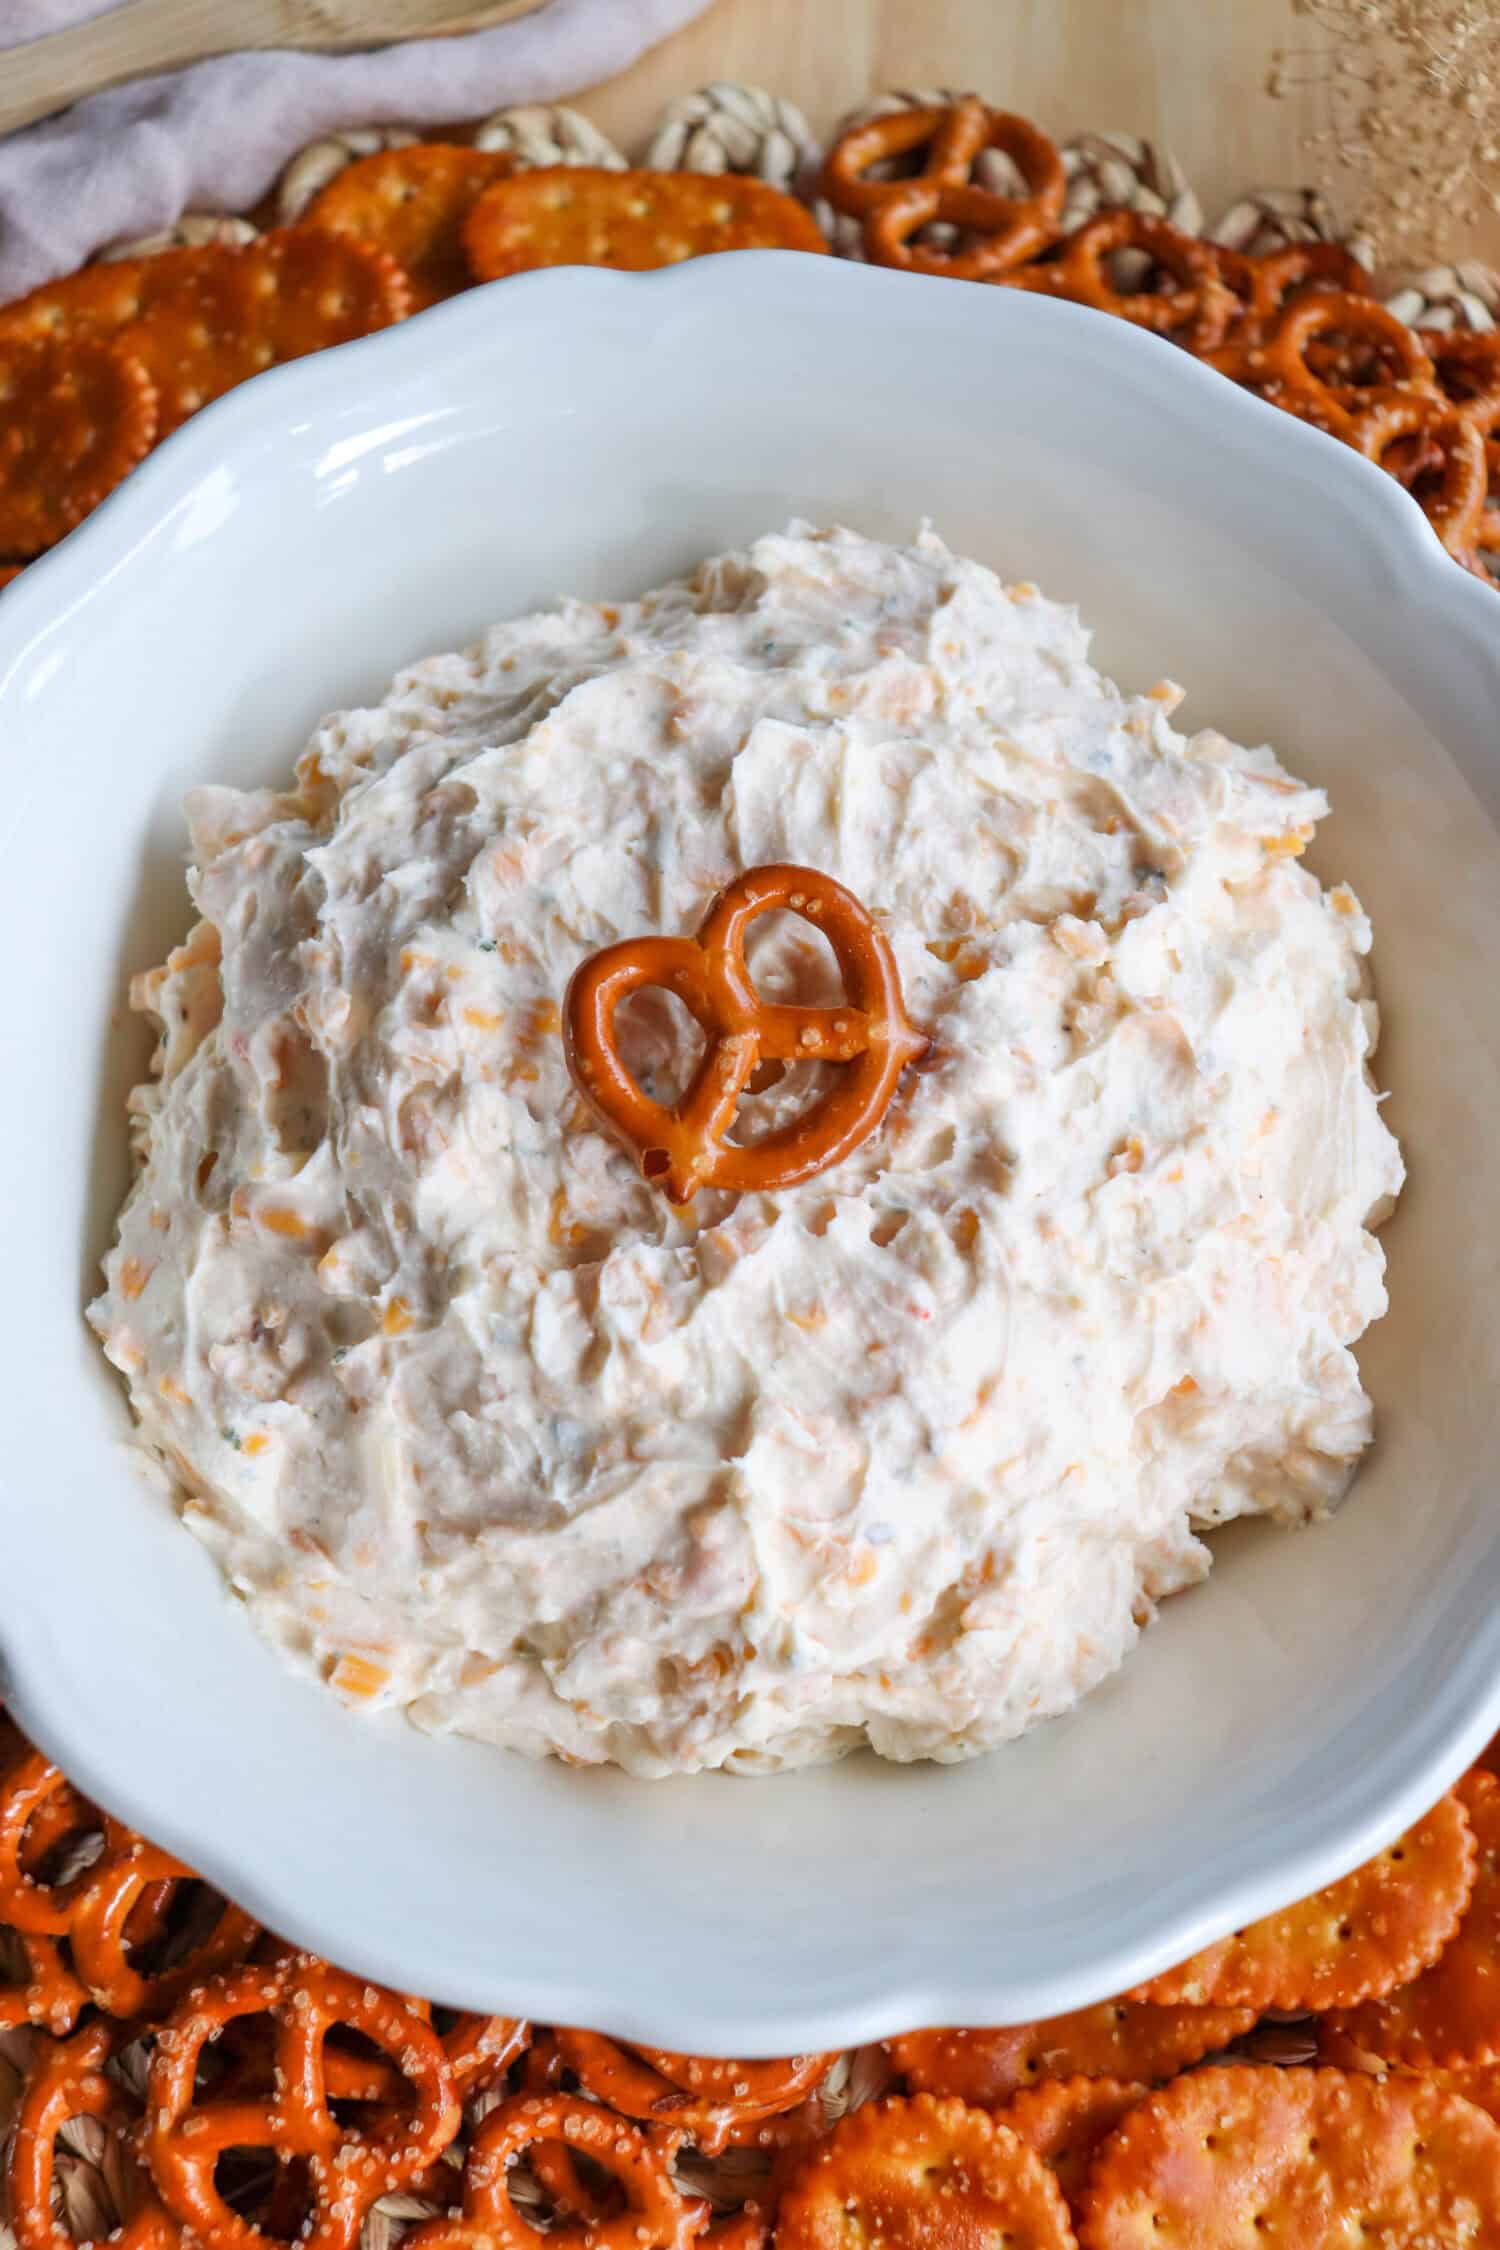 Creamy ranch beer cheese dip in a white bowl, surrounded by pretzels and crackers with a pretzel on top.